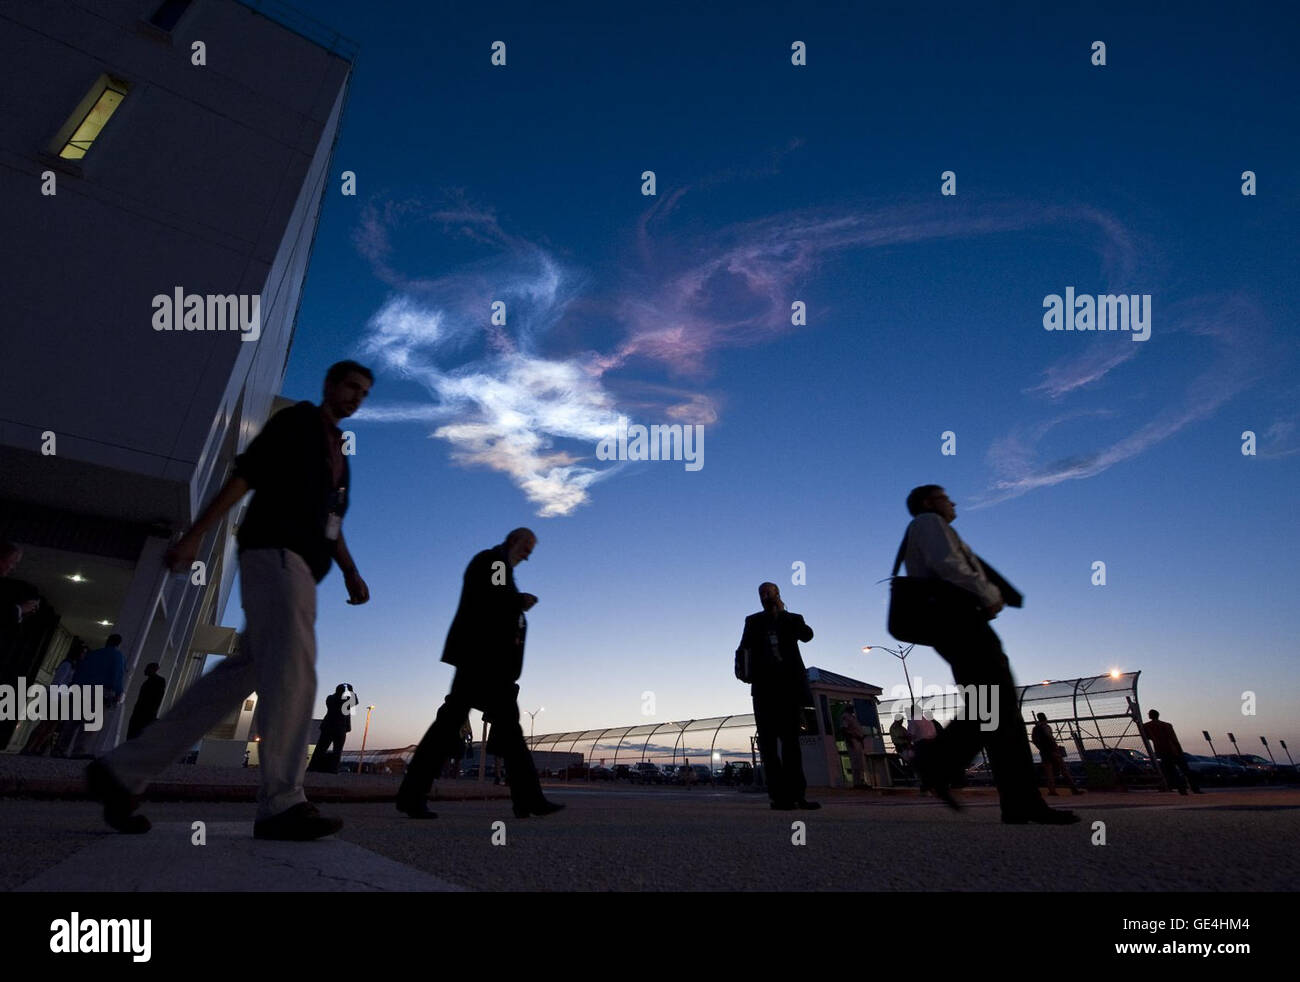 Contrails are seen as workers leave the Launch Control Center after the launch of the space shuttle Discovery and the start of the STS-131 mission at NASA Kennedy Space Center in Cape Canaveral, Fla. on Monday April 5, 2010. Discovery is carrying a multi-purpose logistics module filled with science racks for the laboratories aboard the station. The mission has three planned spacewalks, with work to include replacing an ammonia tank assembly, retrieving a Japanese experiment from the stationÕs exterior, and switching out a rate gyro assembly on the stationÕs truss structure. Photo Credit: (NASA Stock Photo